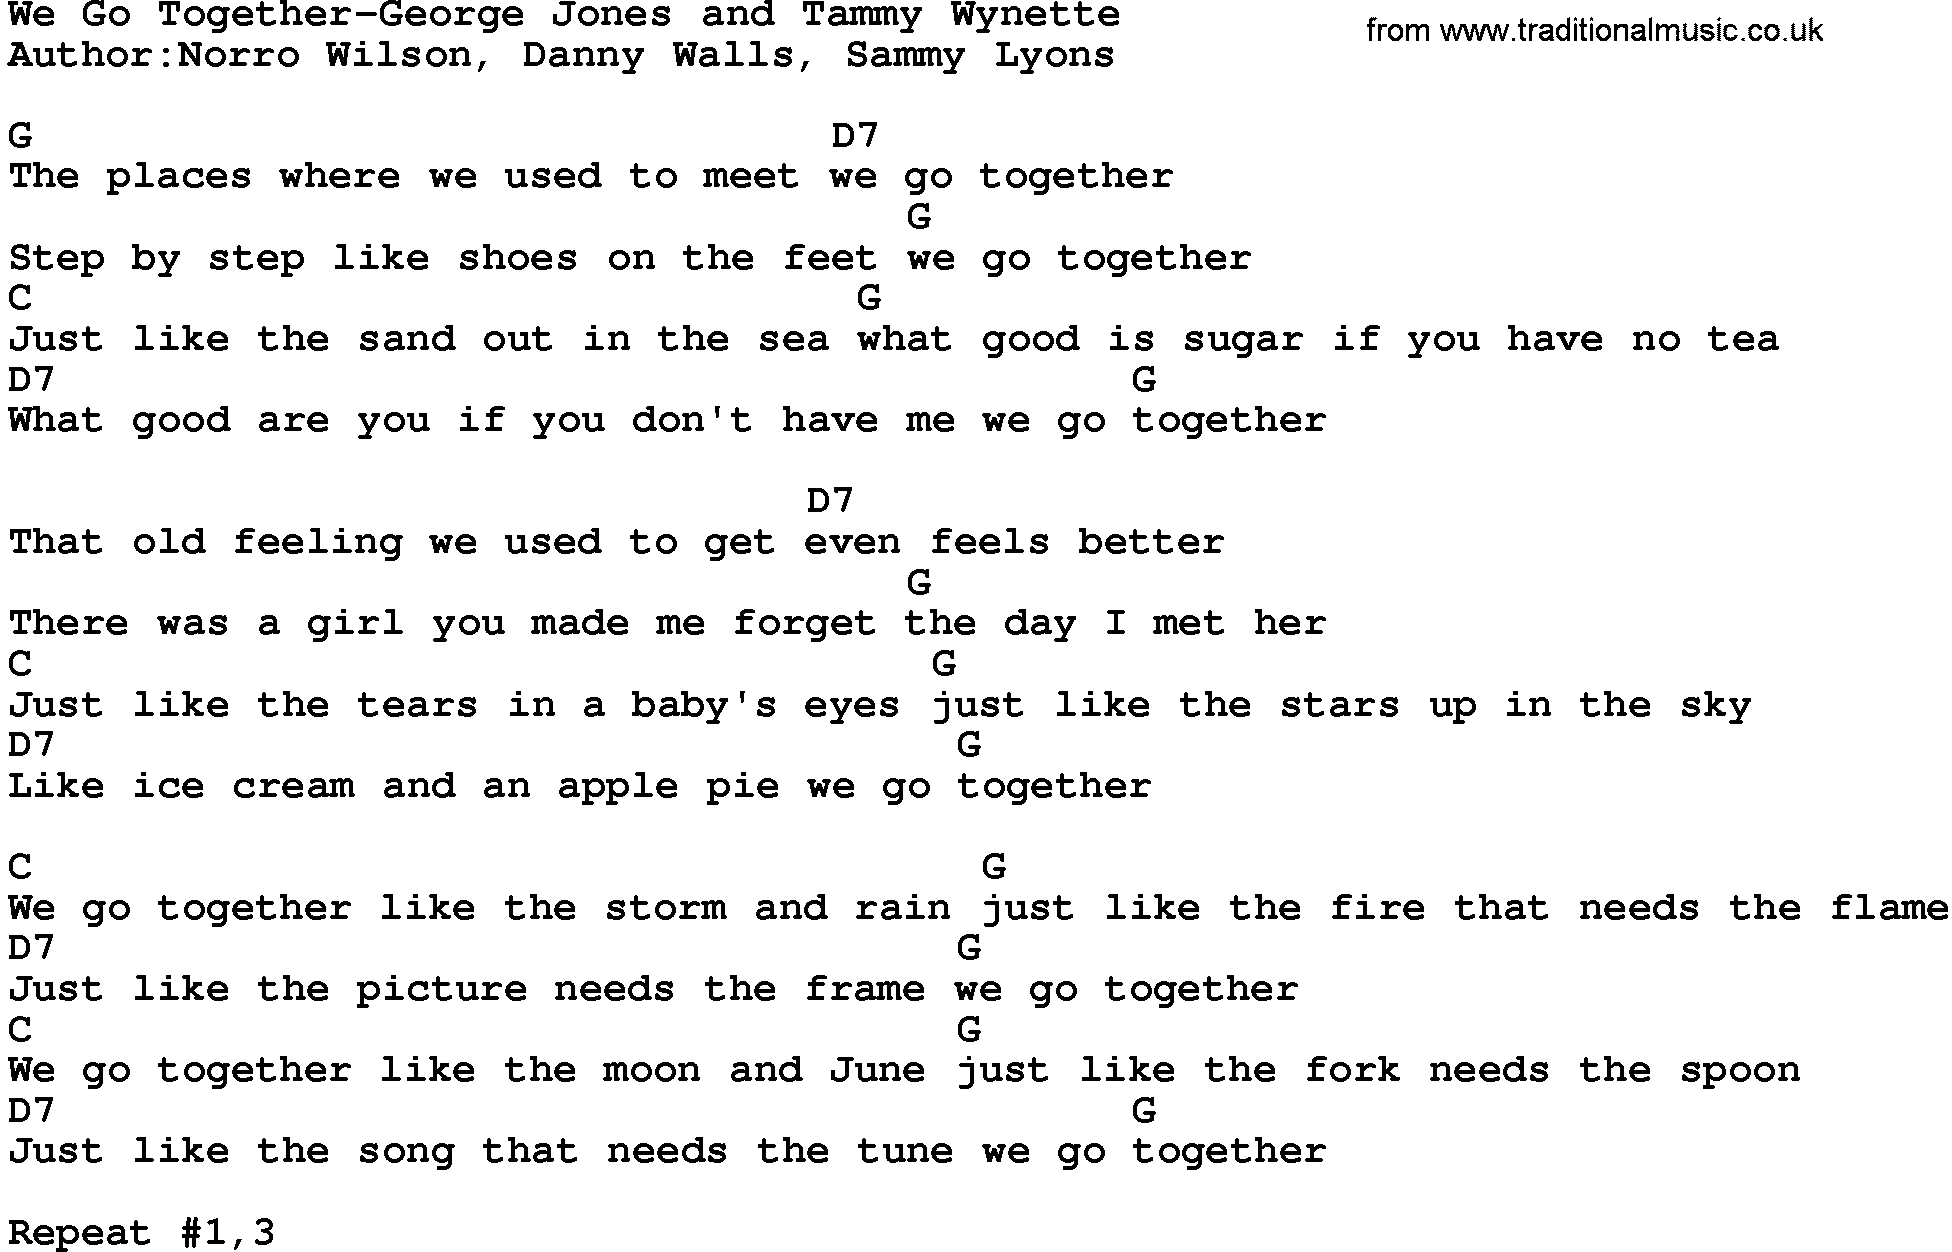 Country music song: We Go Together-George Jones And Tammy Wynette lyrics and chords